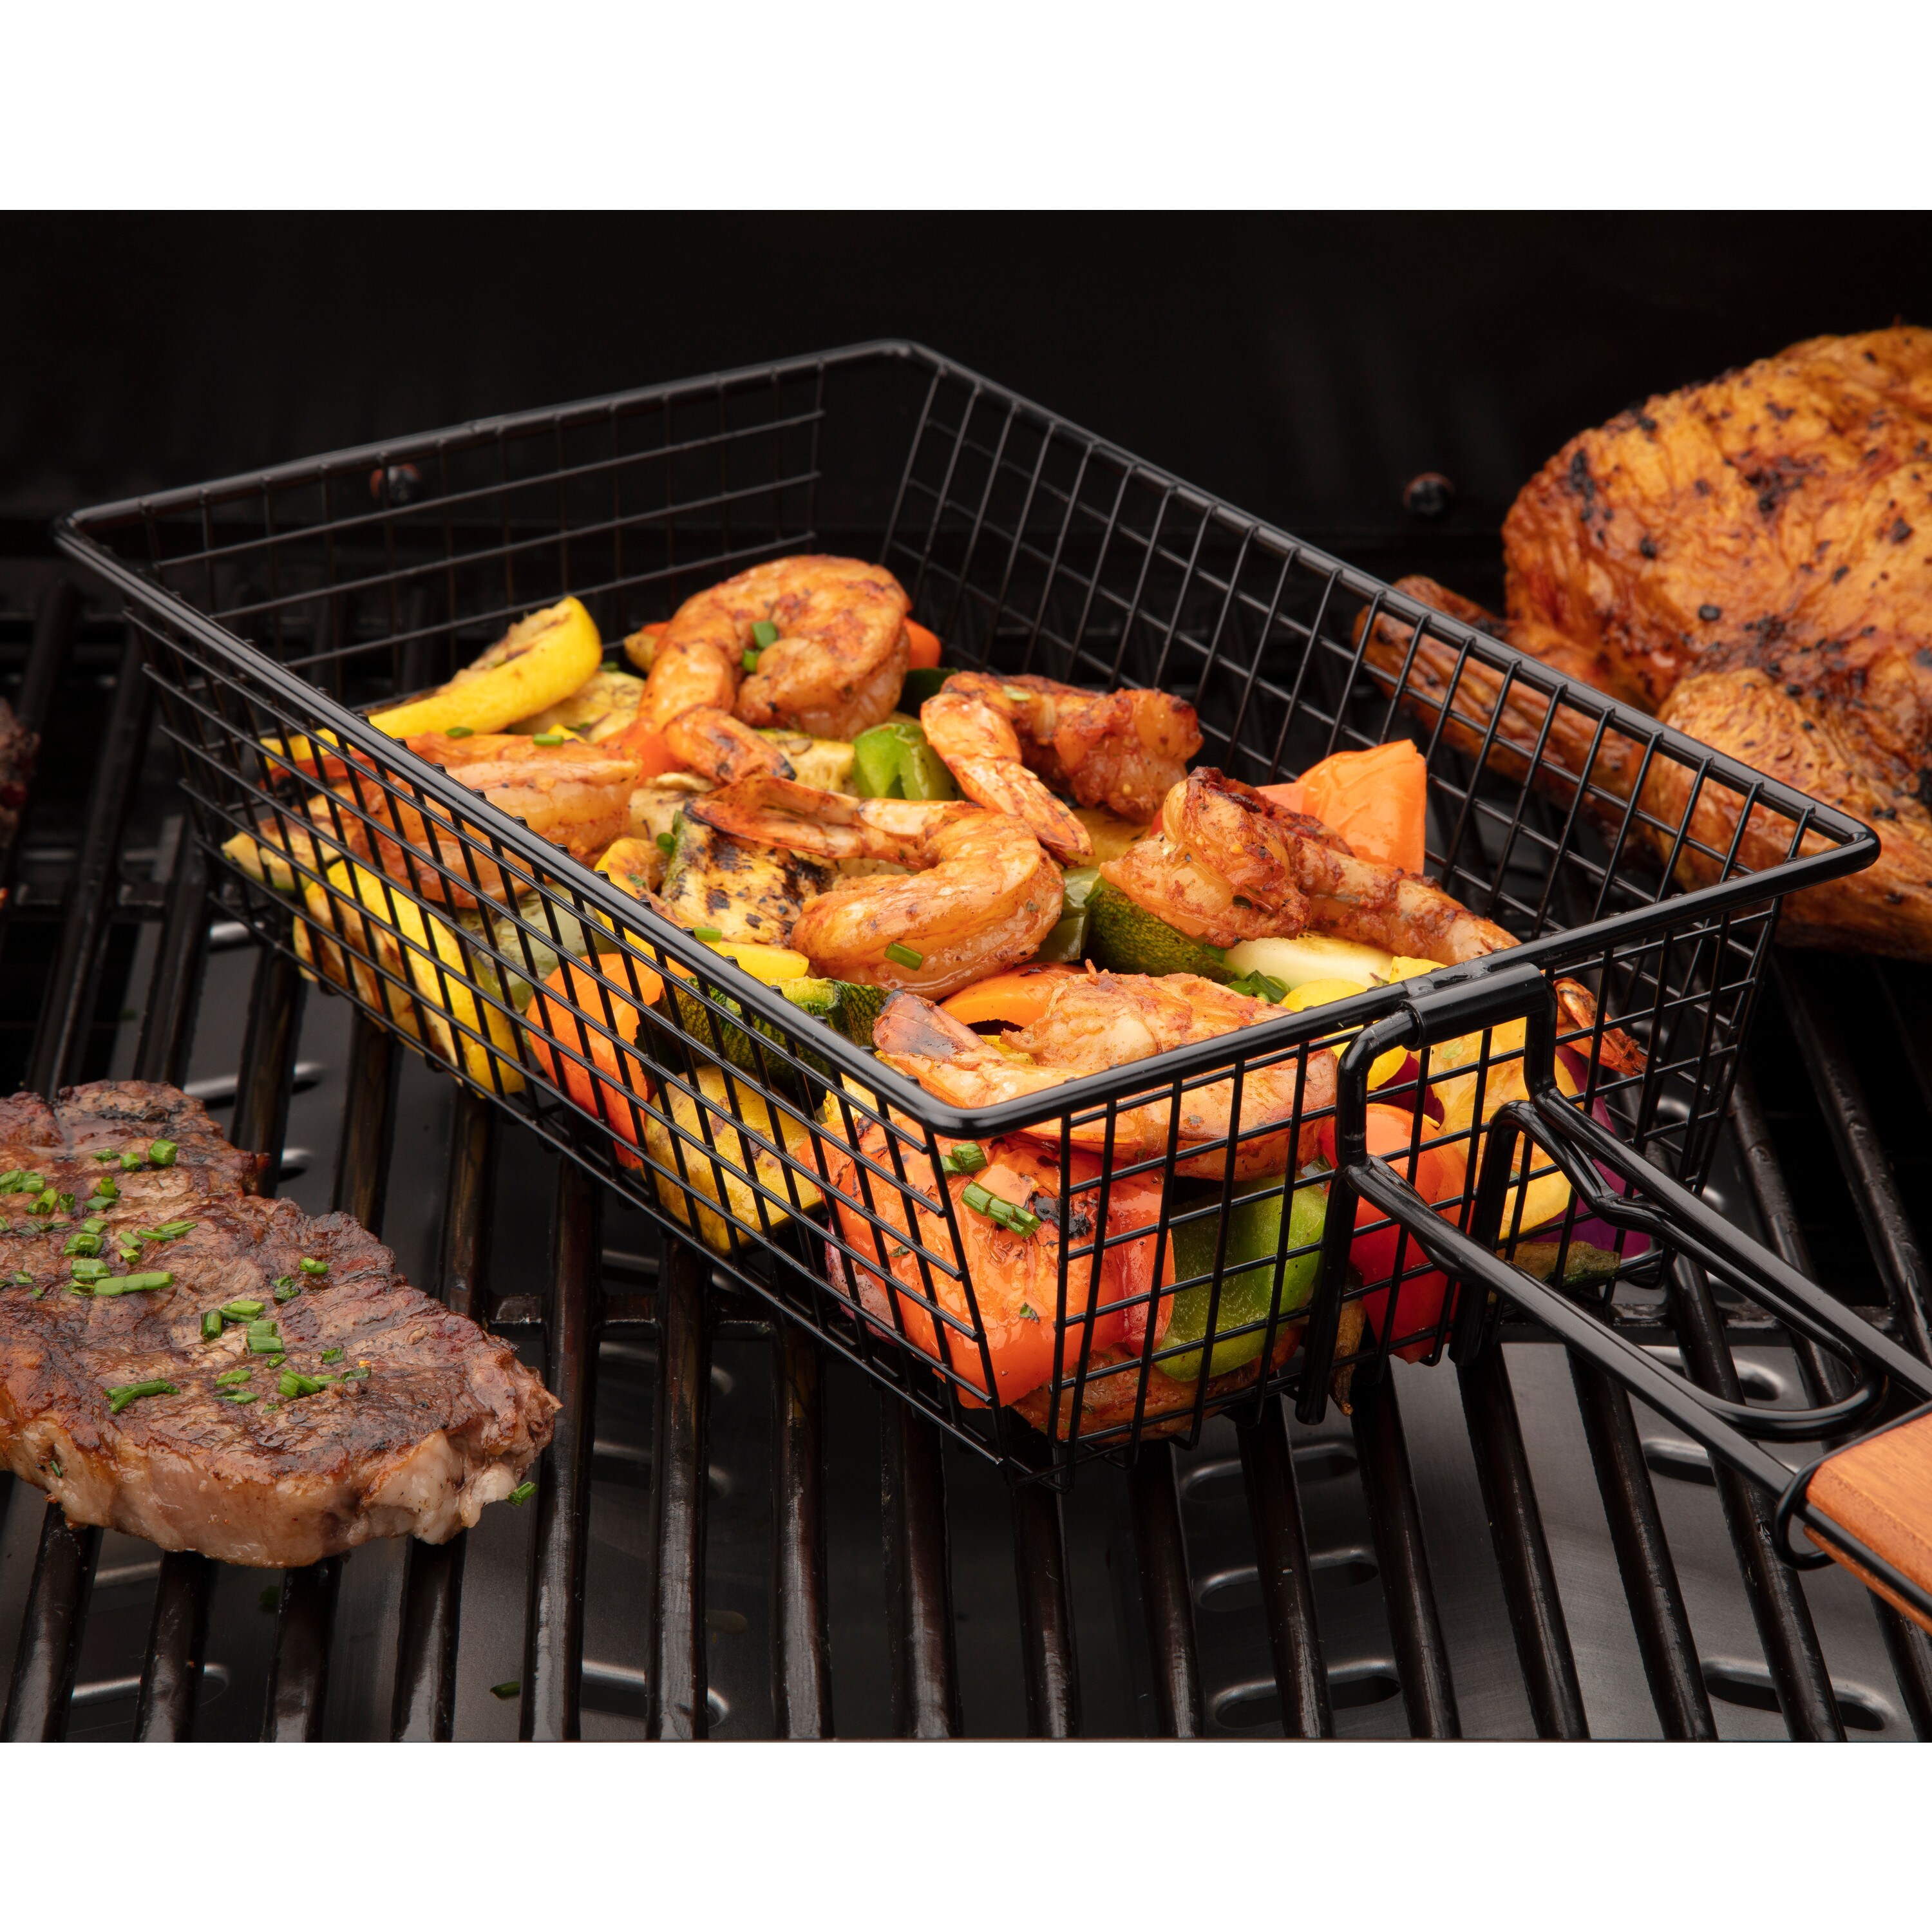 Stainless Steel BBQ Grill Accessories - Vegetable Grill Basket - Non-Stick  Coating - Easy to Use Rotisserie for Outdoor Barbecues & Campfires 